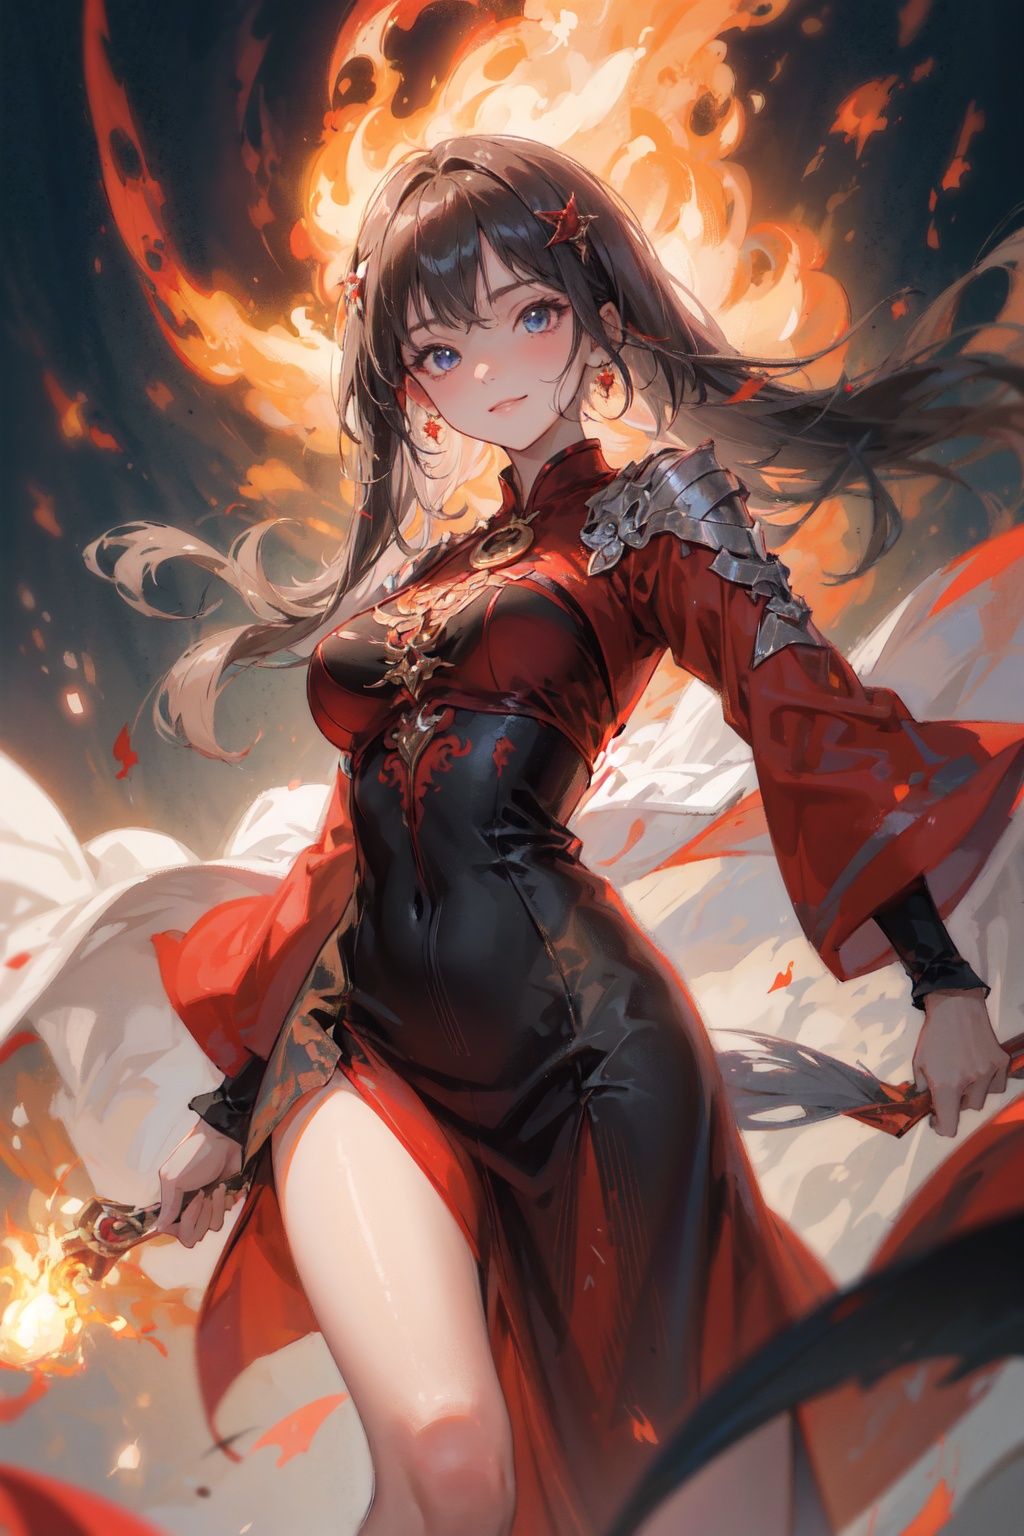 best quality，(masterpiece:1.3)，fullbody shot,ultra-detailed,solo,1girl, battle_aura, helical_visible_aura full of background,Magical Fire on hands,cool and powerful pose,red robe, hairclip, burning aura,floating hair,floating fire,heat wave, squating,fire devil,carbonized grounddelicate_features:1.5，Pretty_Face:1.5,smiling,cool,